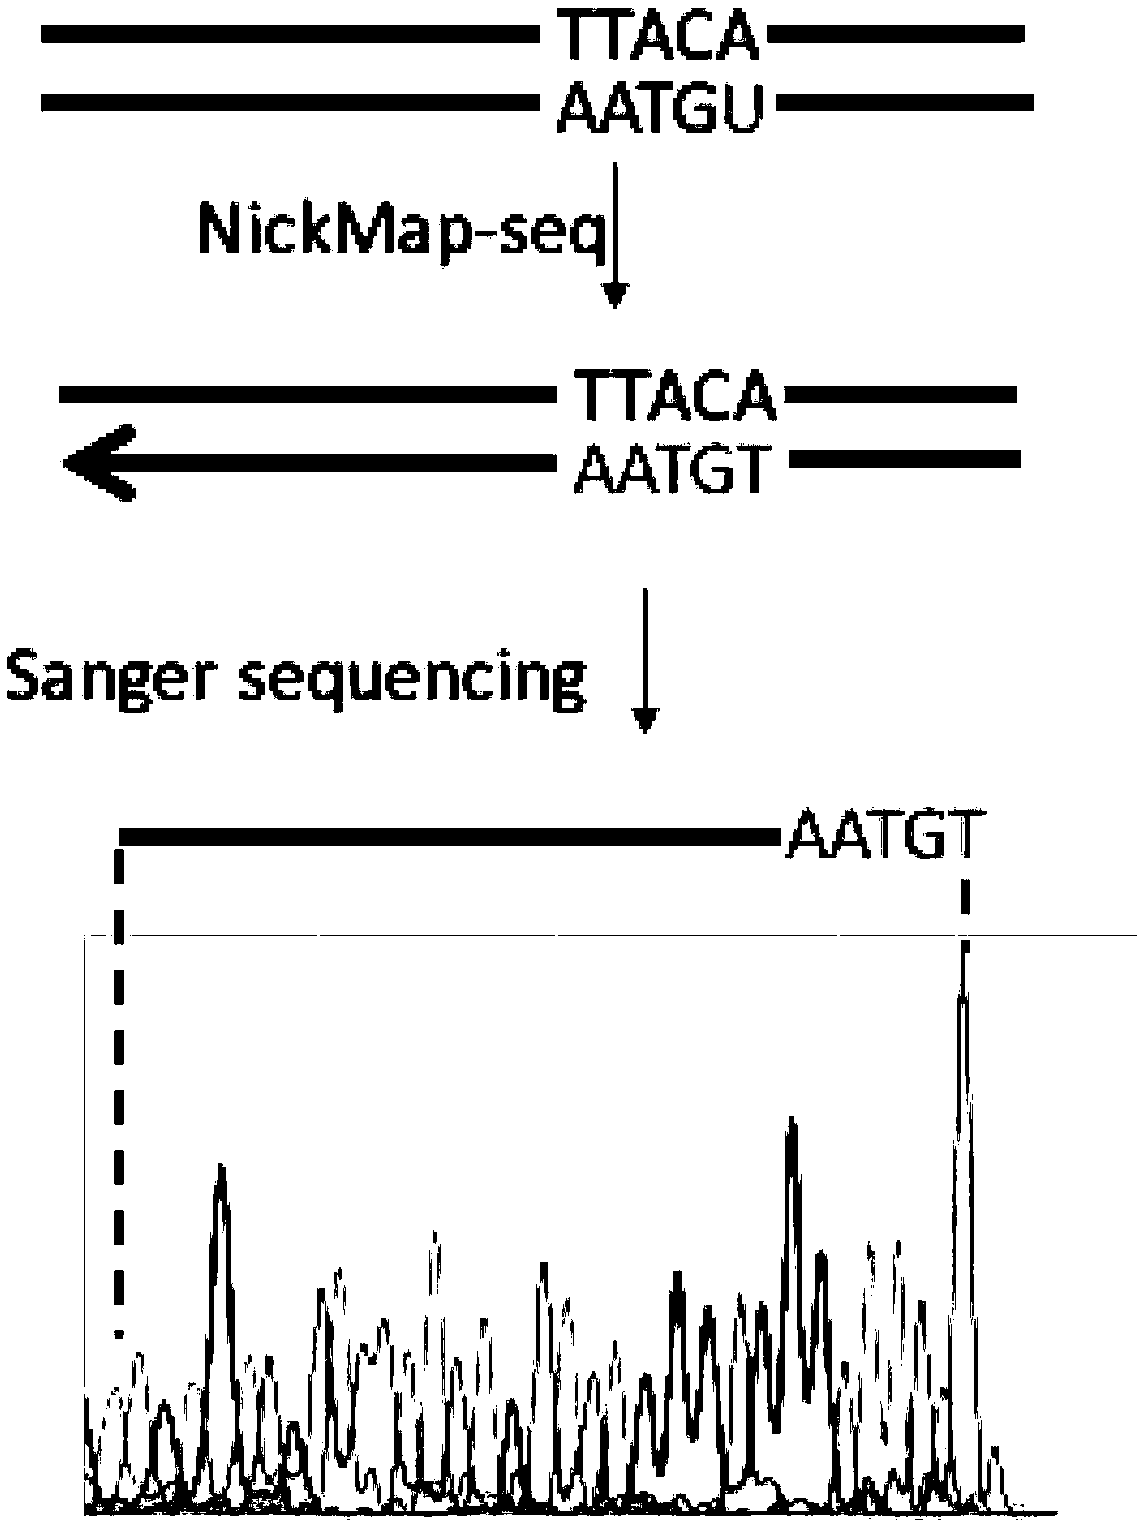 Method for locating damage and modification sites on genomic DNA